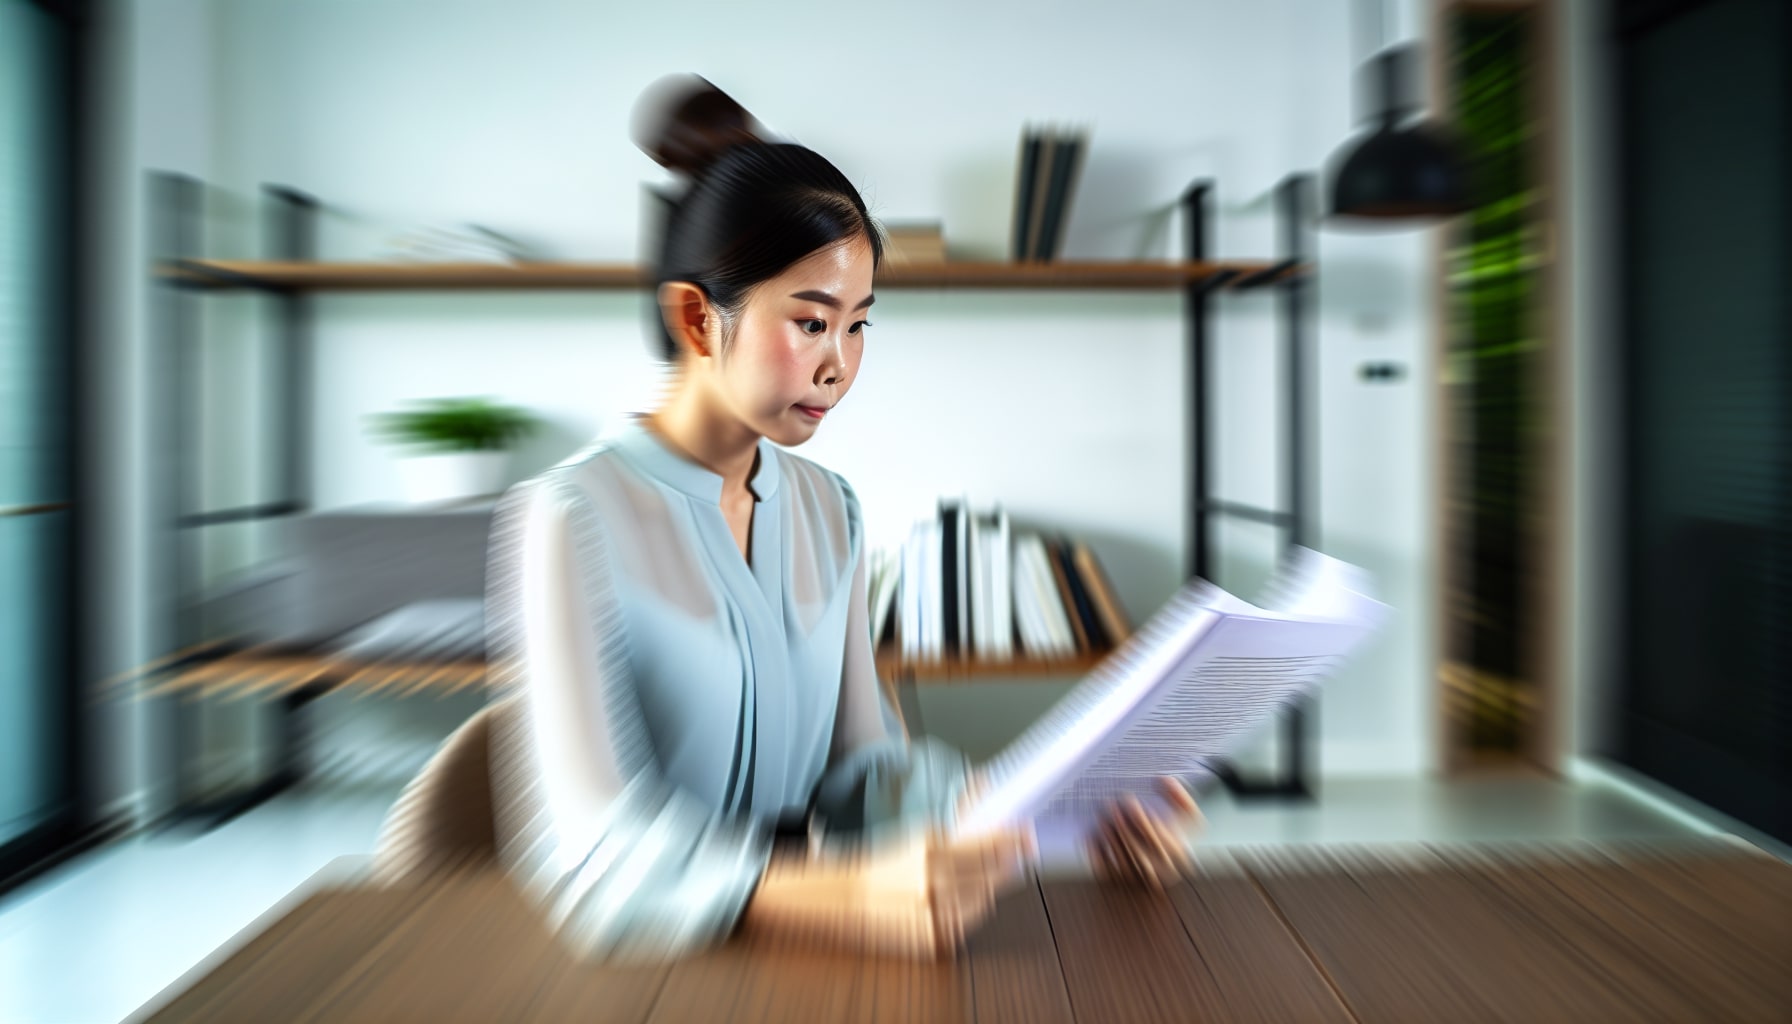 A person efficiently reading a paper with blurred text to represent speed reading skills